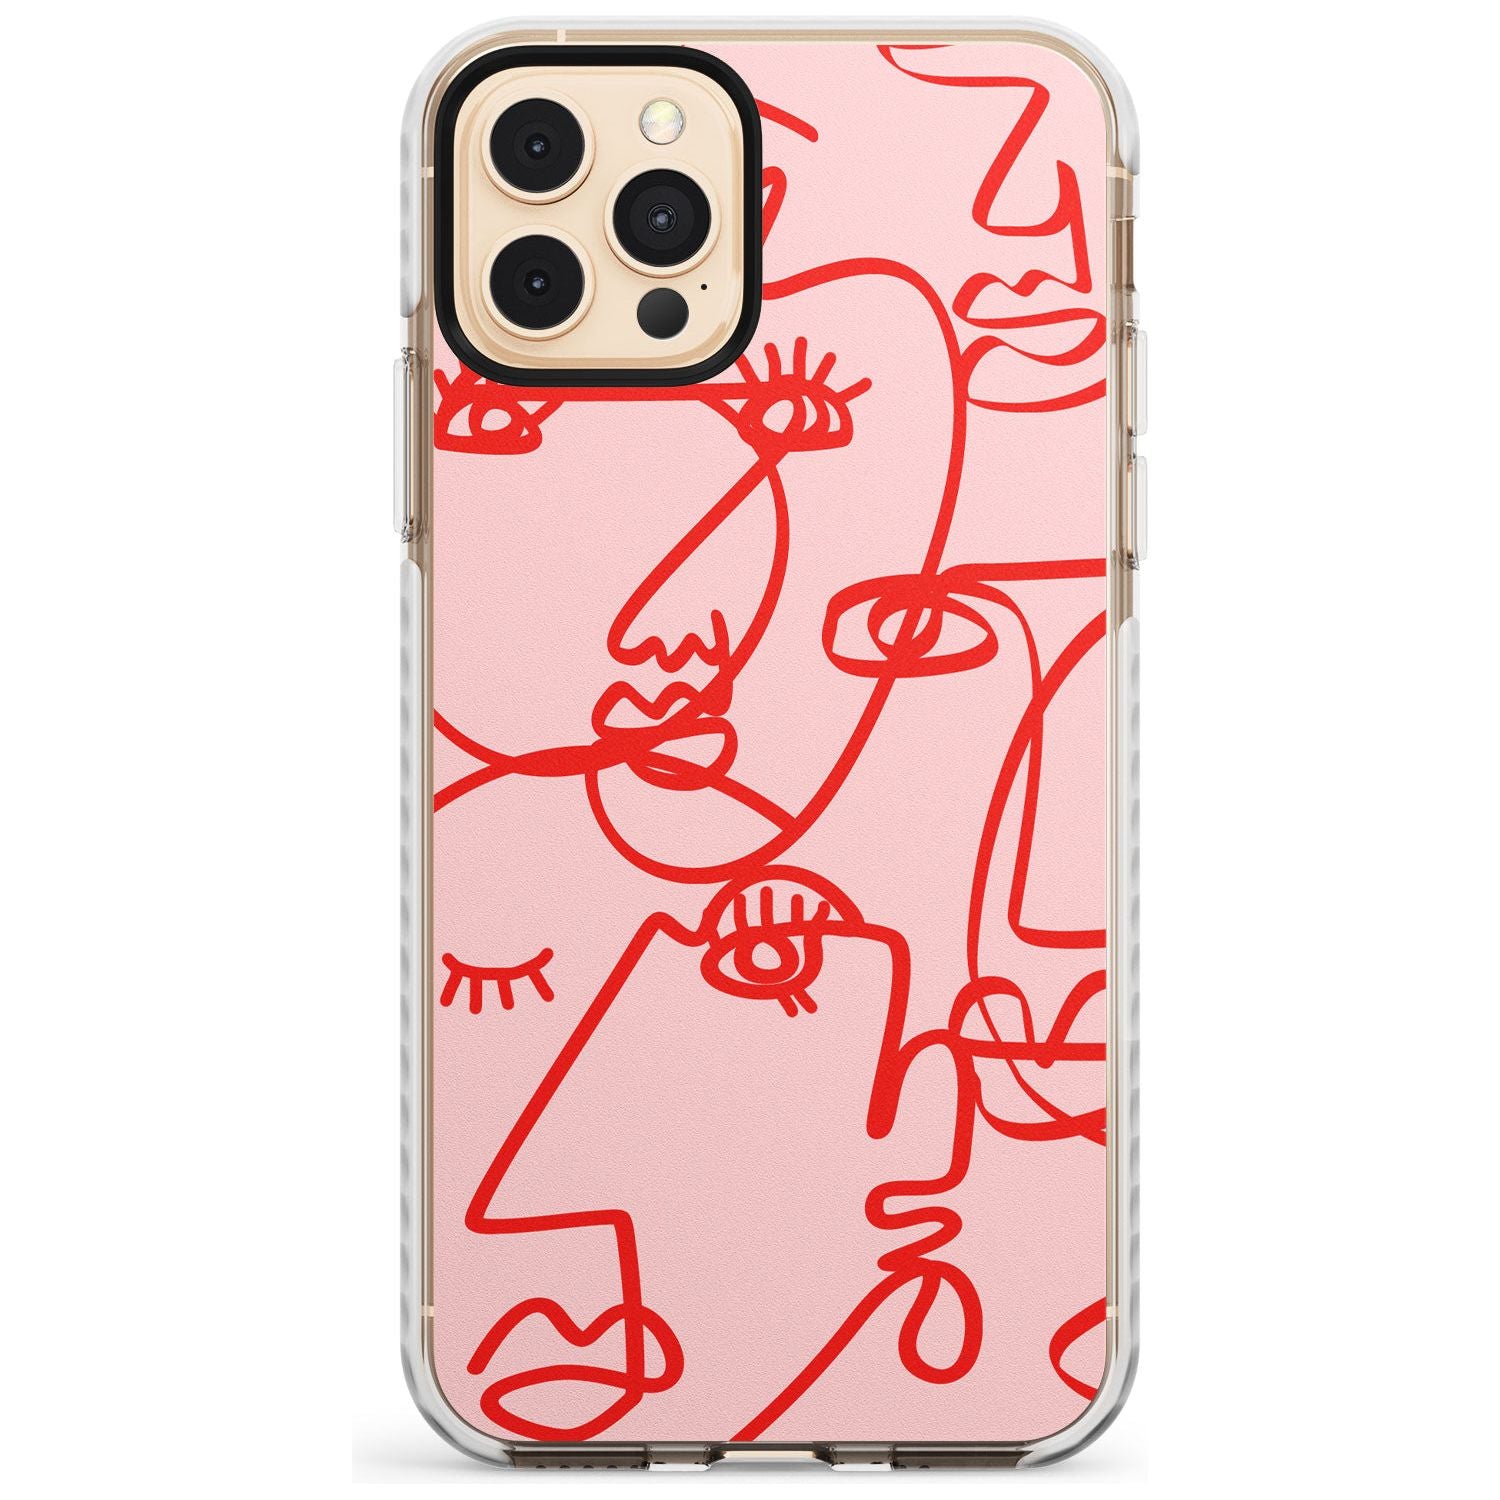 Continuous Line Faces: Red on Pink Slim TPU Phone Case for iPhone 11 Pro Max